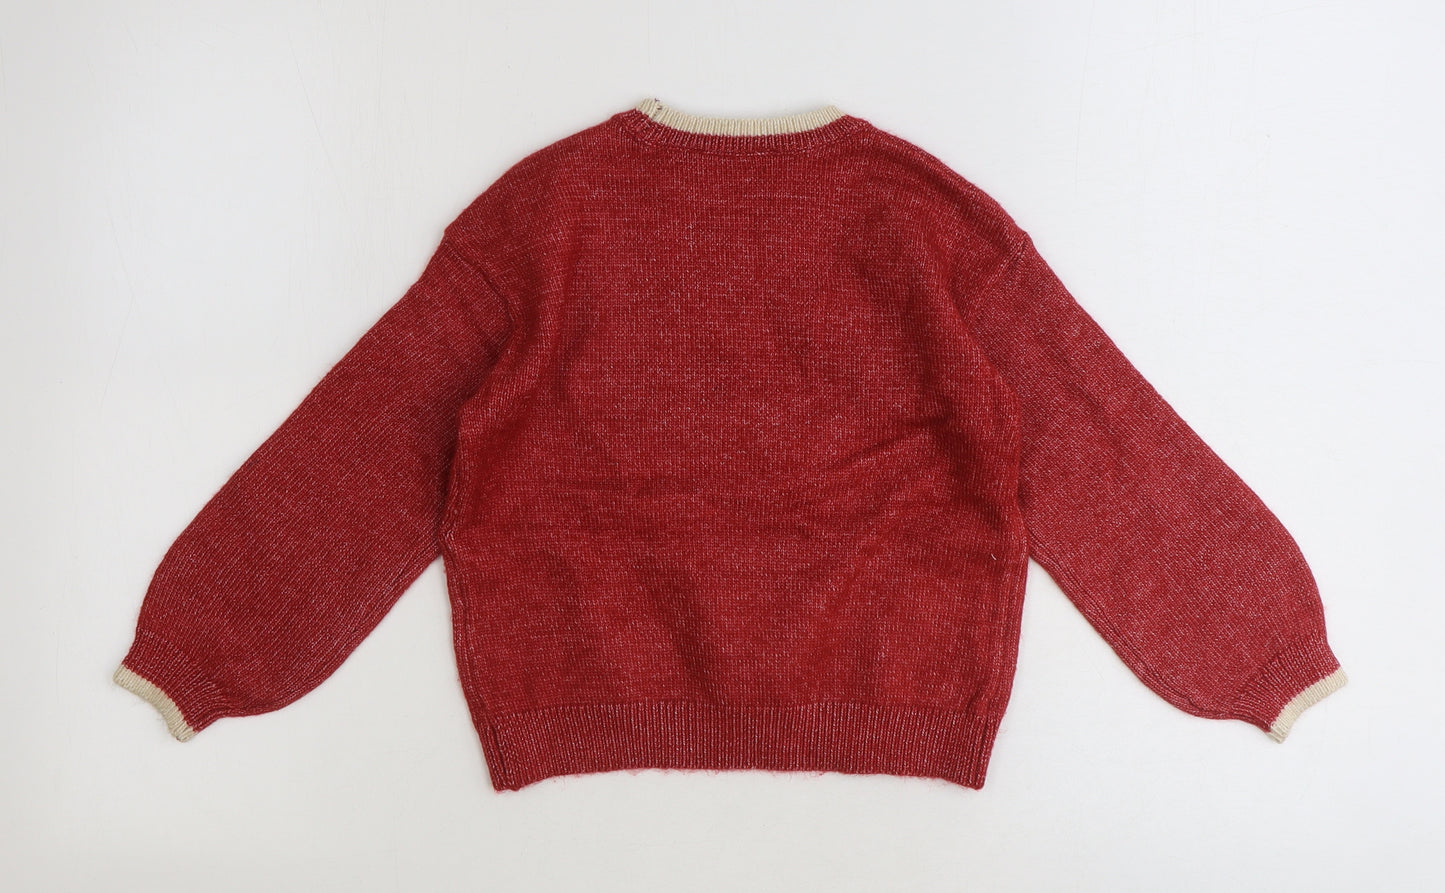 Marks and Spencer Girls Red Round Neck Polyester Pullover Jumper Size 5-6 Years Pullover - Happy Howl-idays